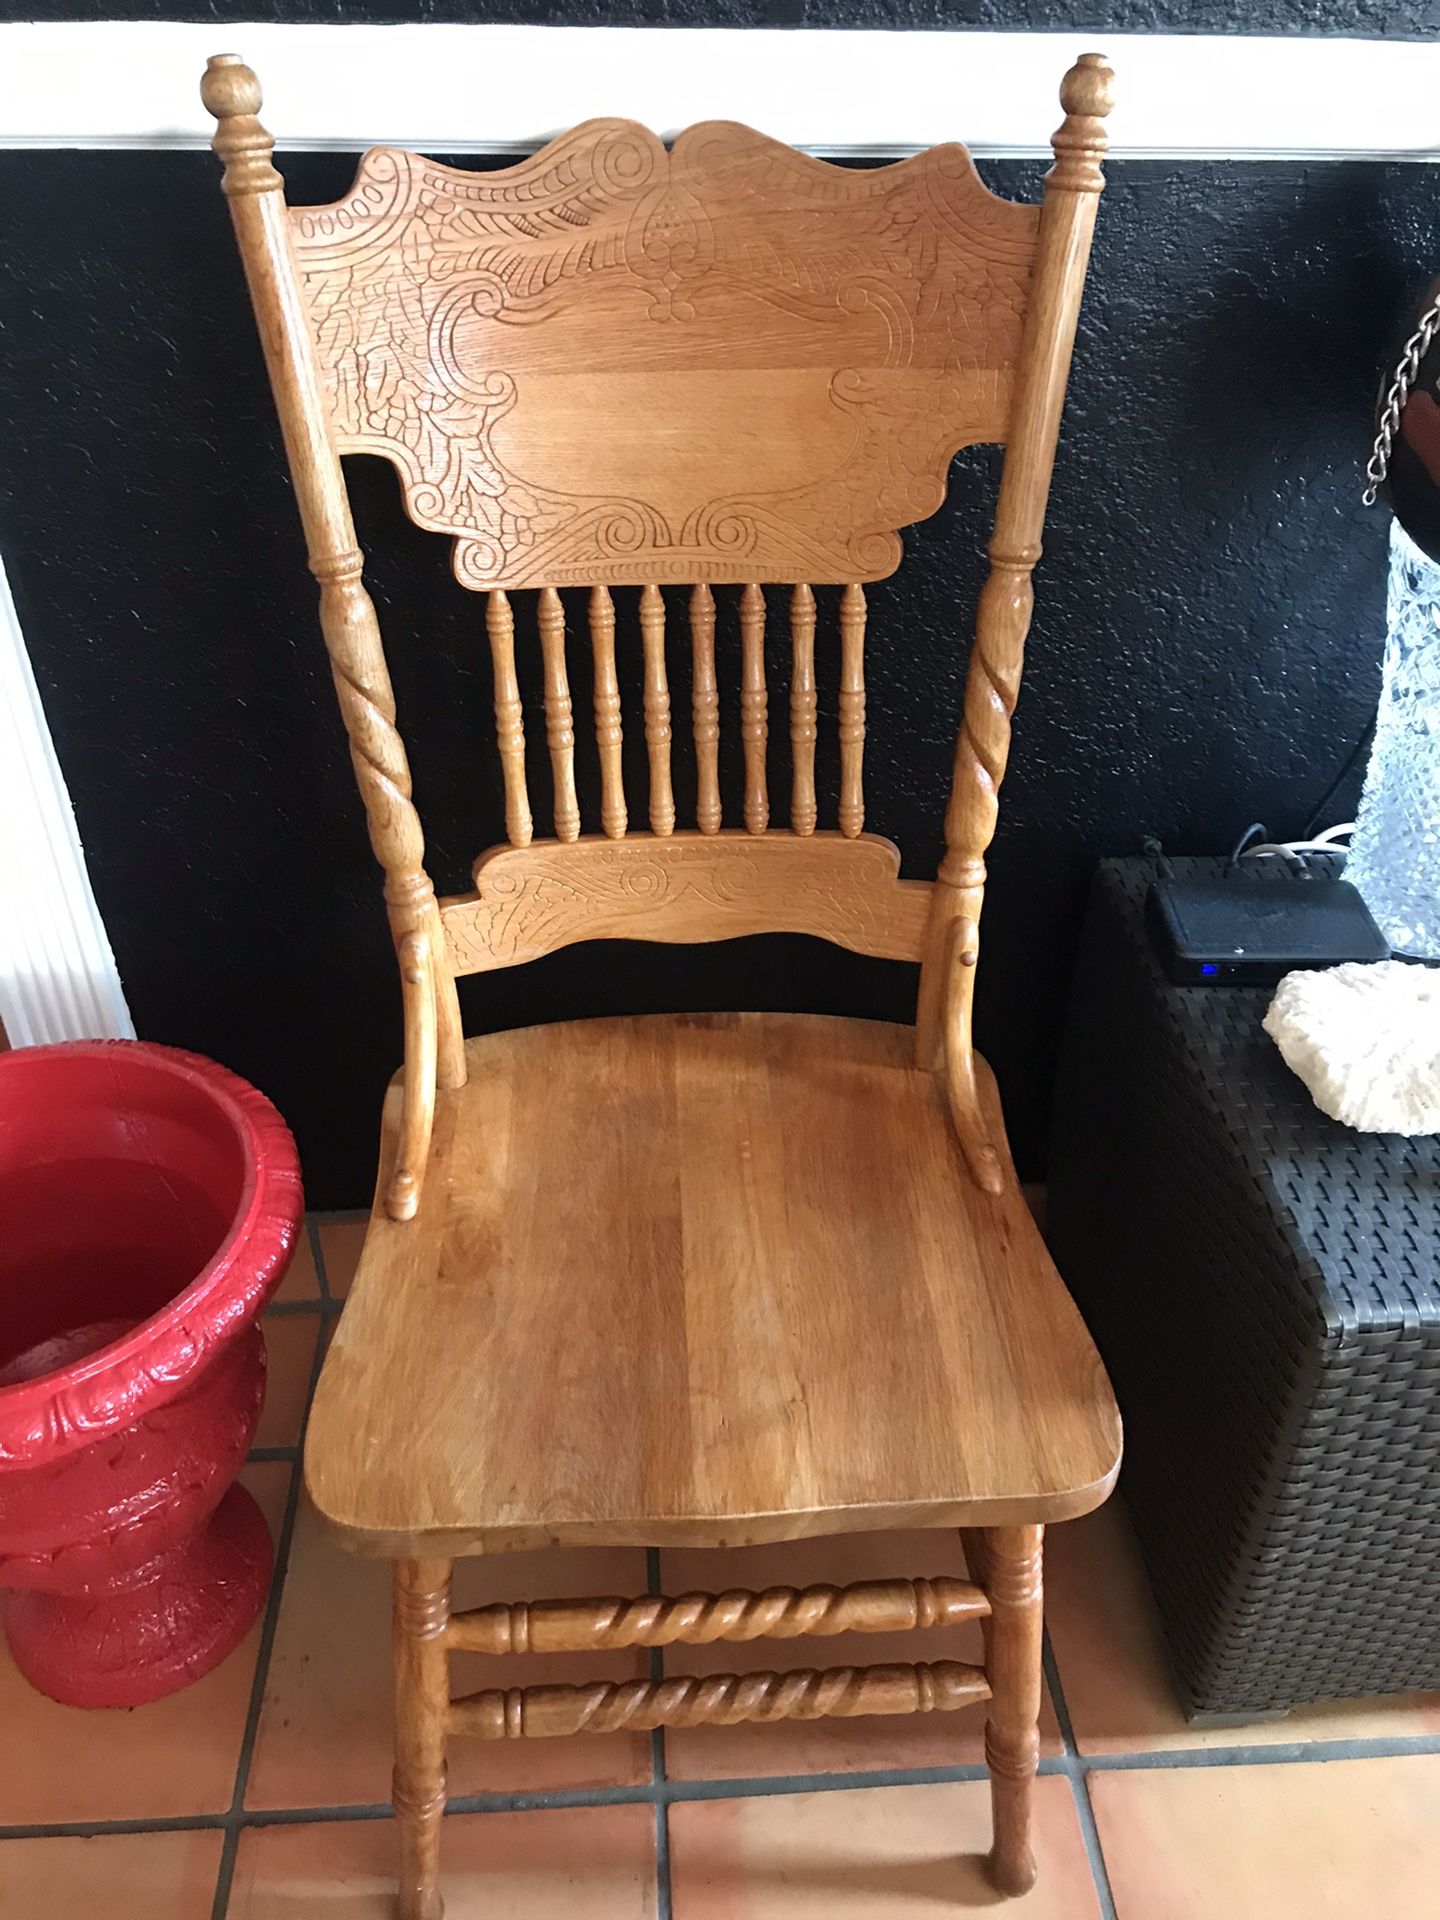 Antique solid wood chair